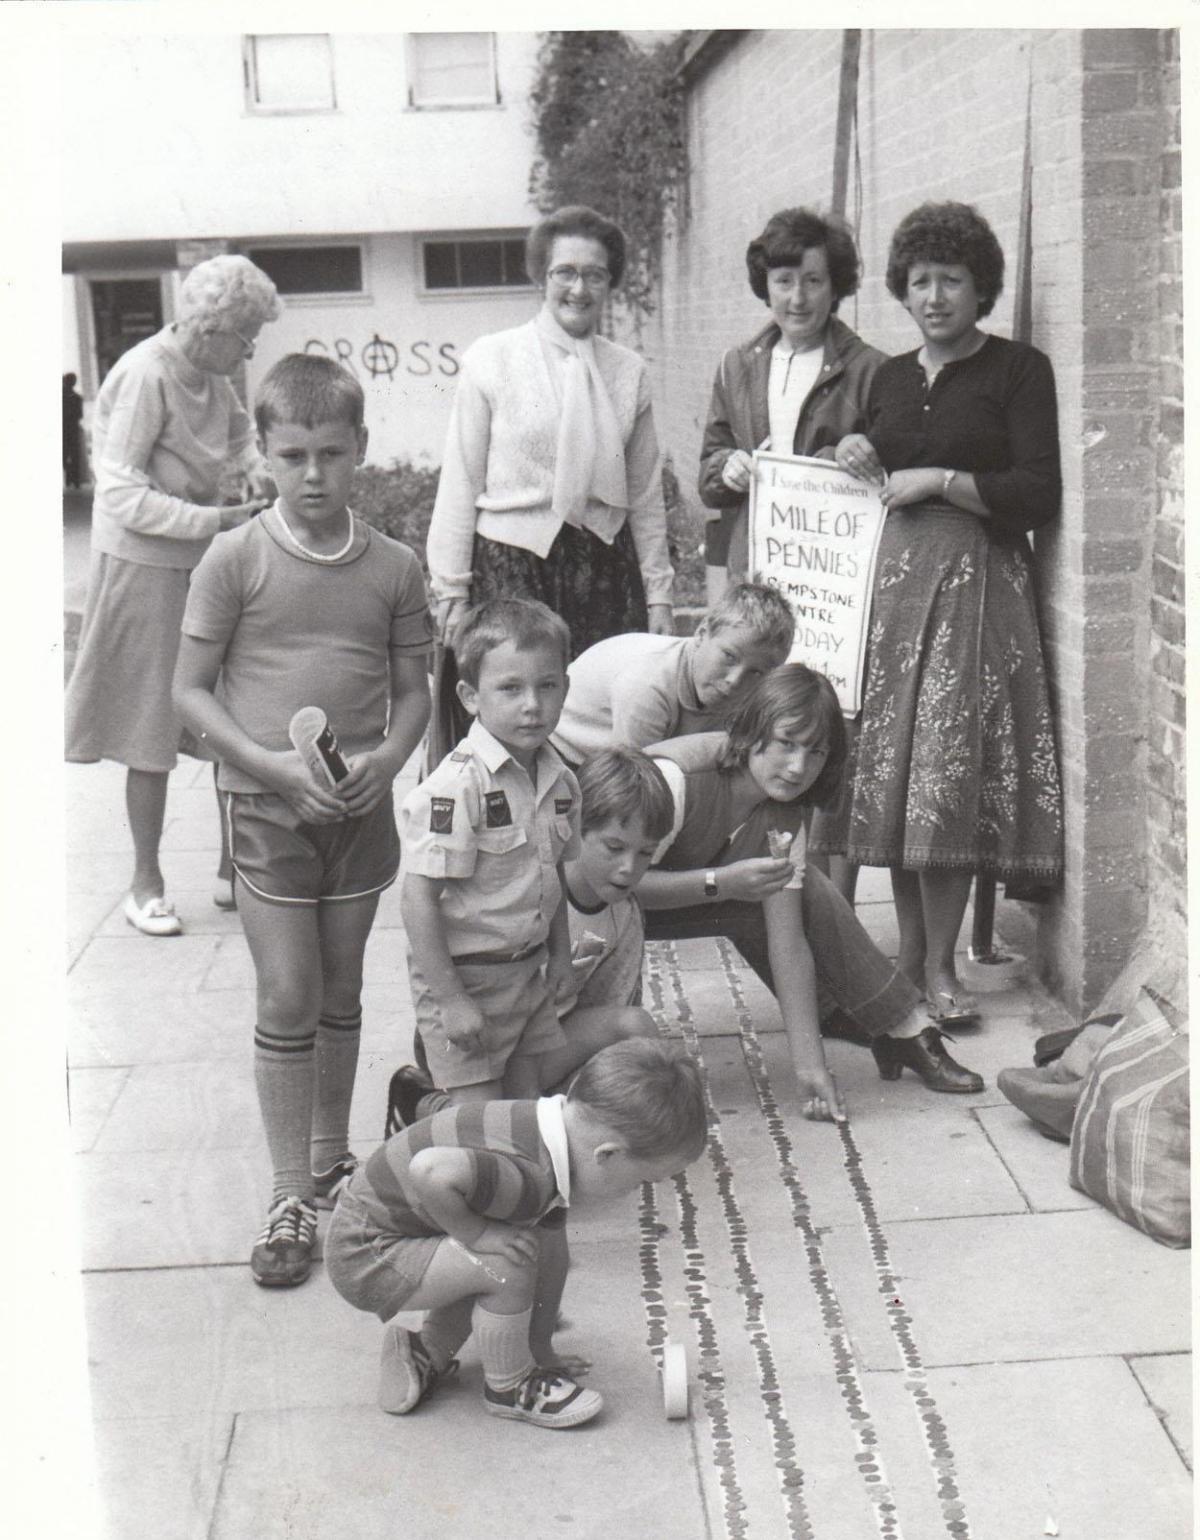 In August 1982, it was a case of children helping children at the Rempstone Centre at Wareham. The local branch of the Save the Children Fund organised a mile of pennies on the pavement.